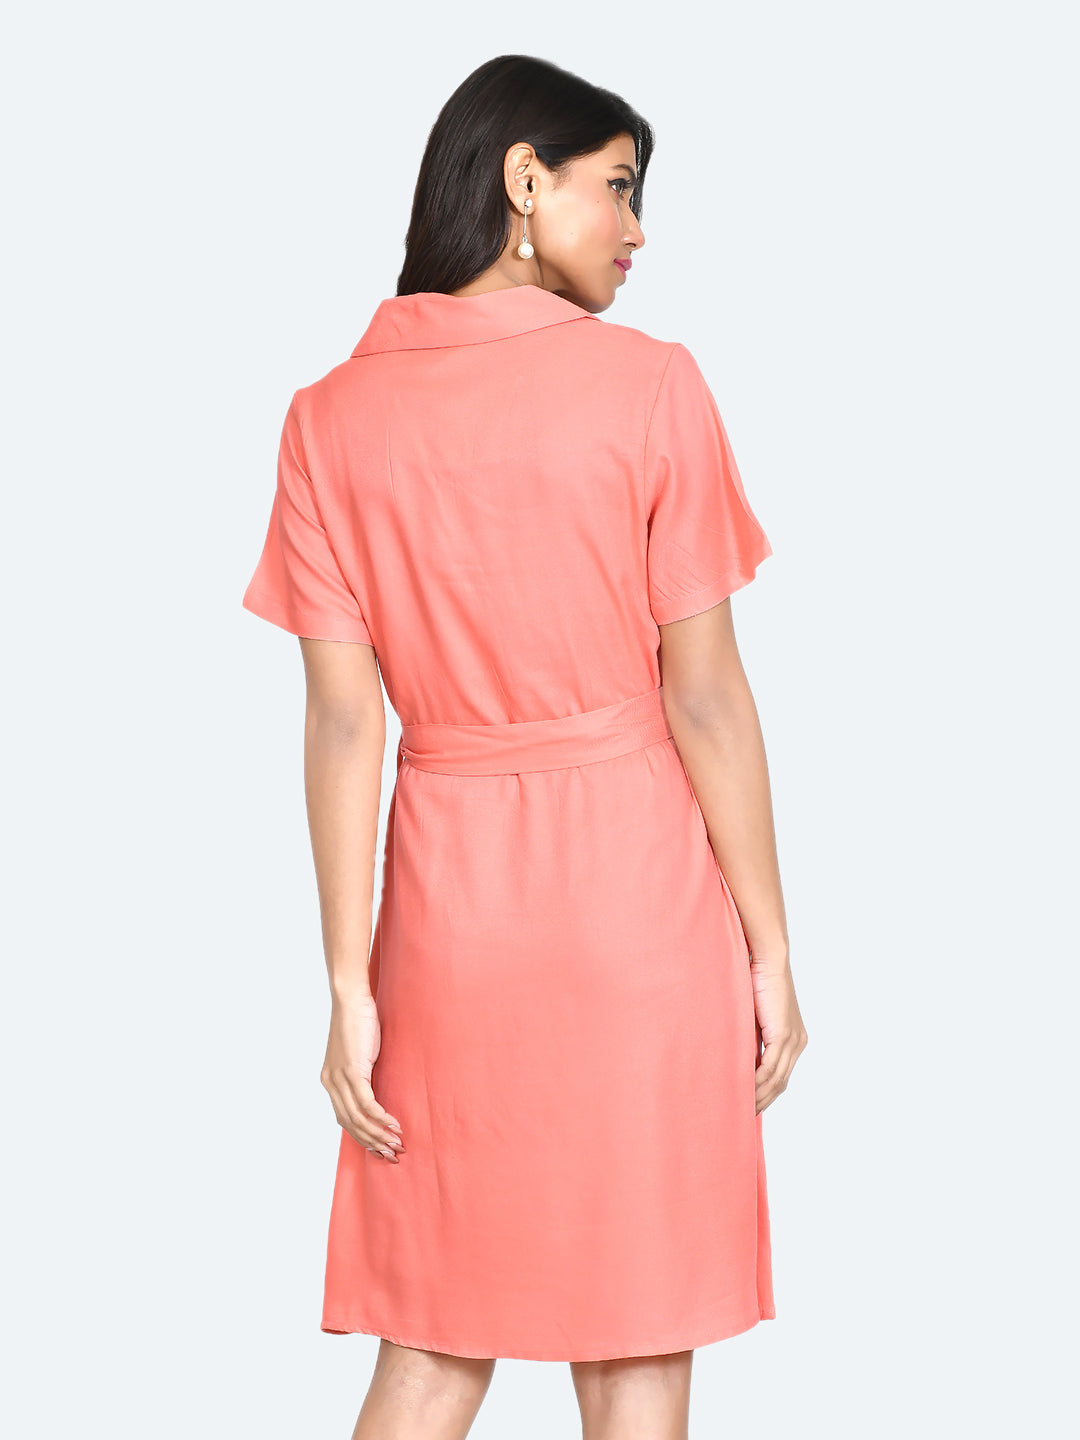 Coral Solid Shirt Dress For Women